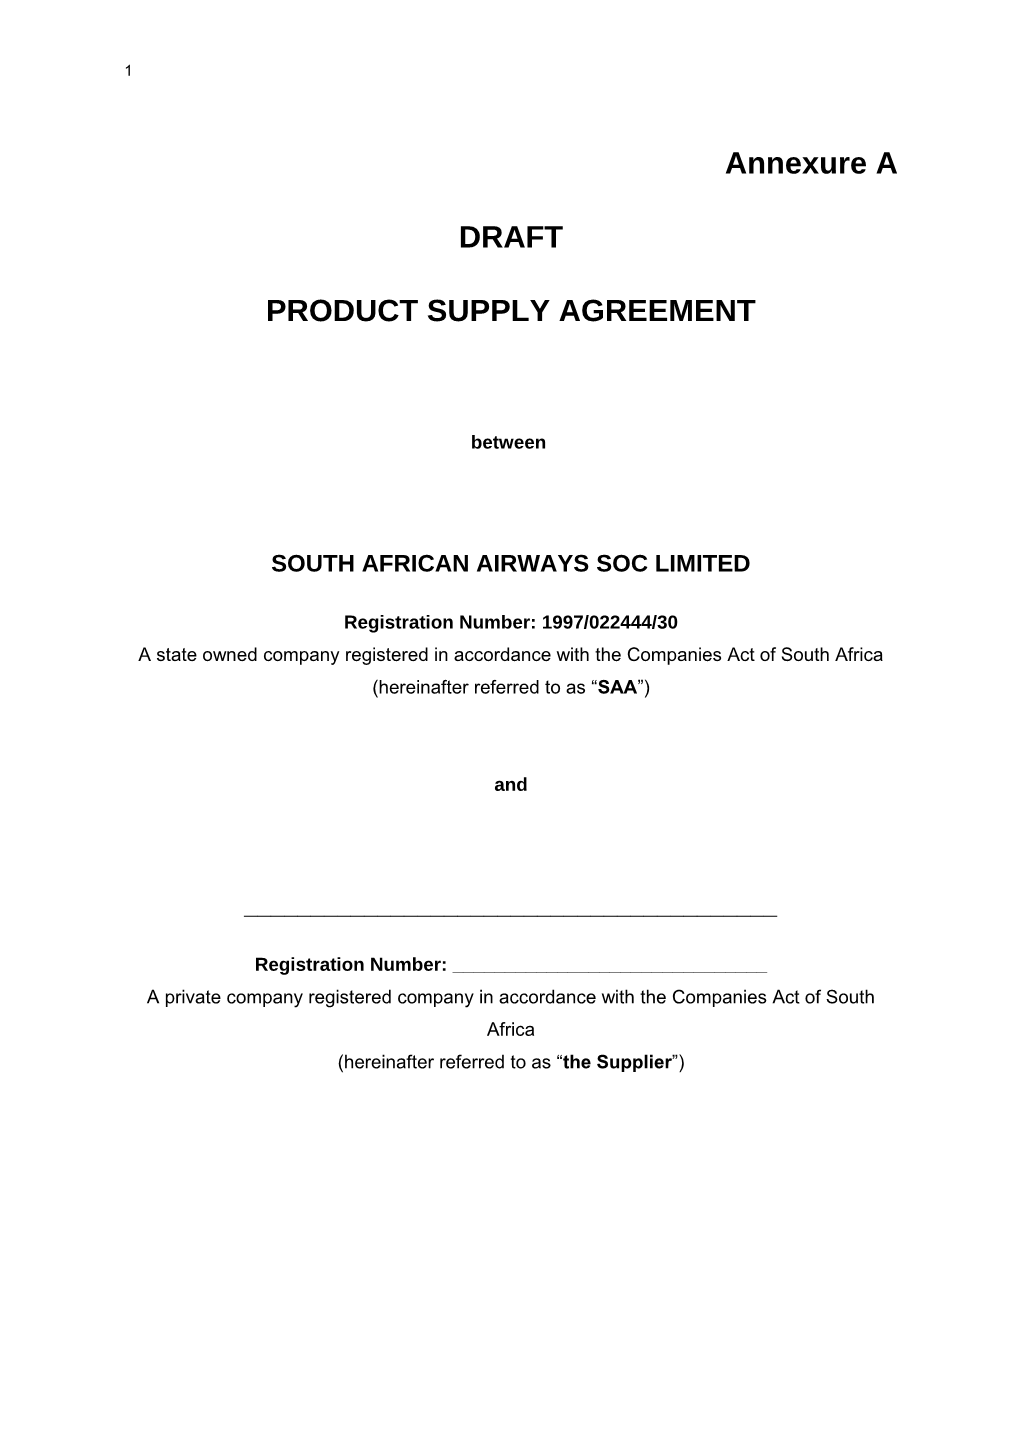 Product Supply Agreement